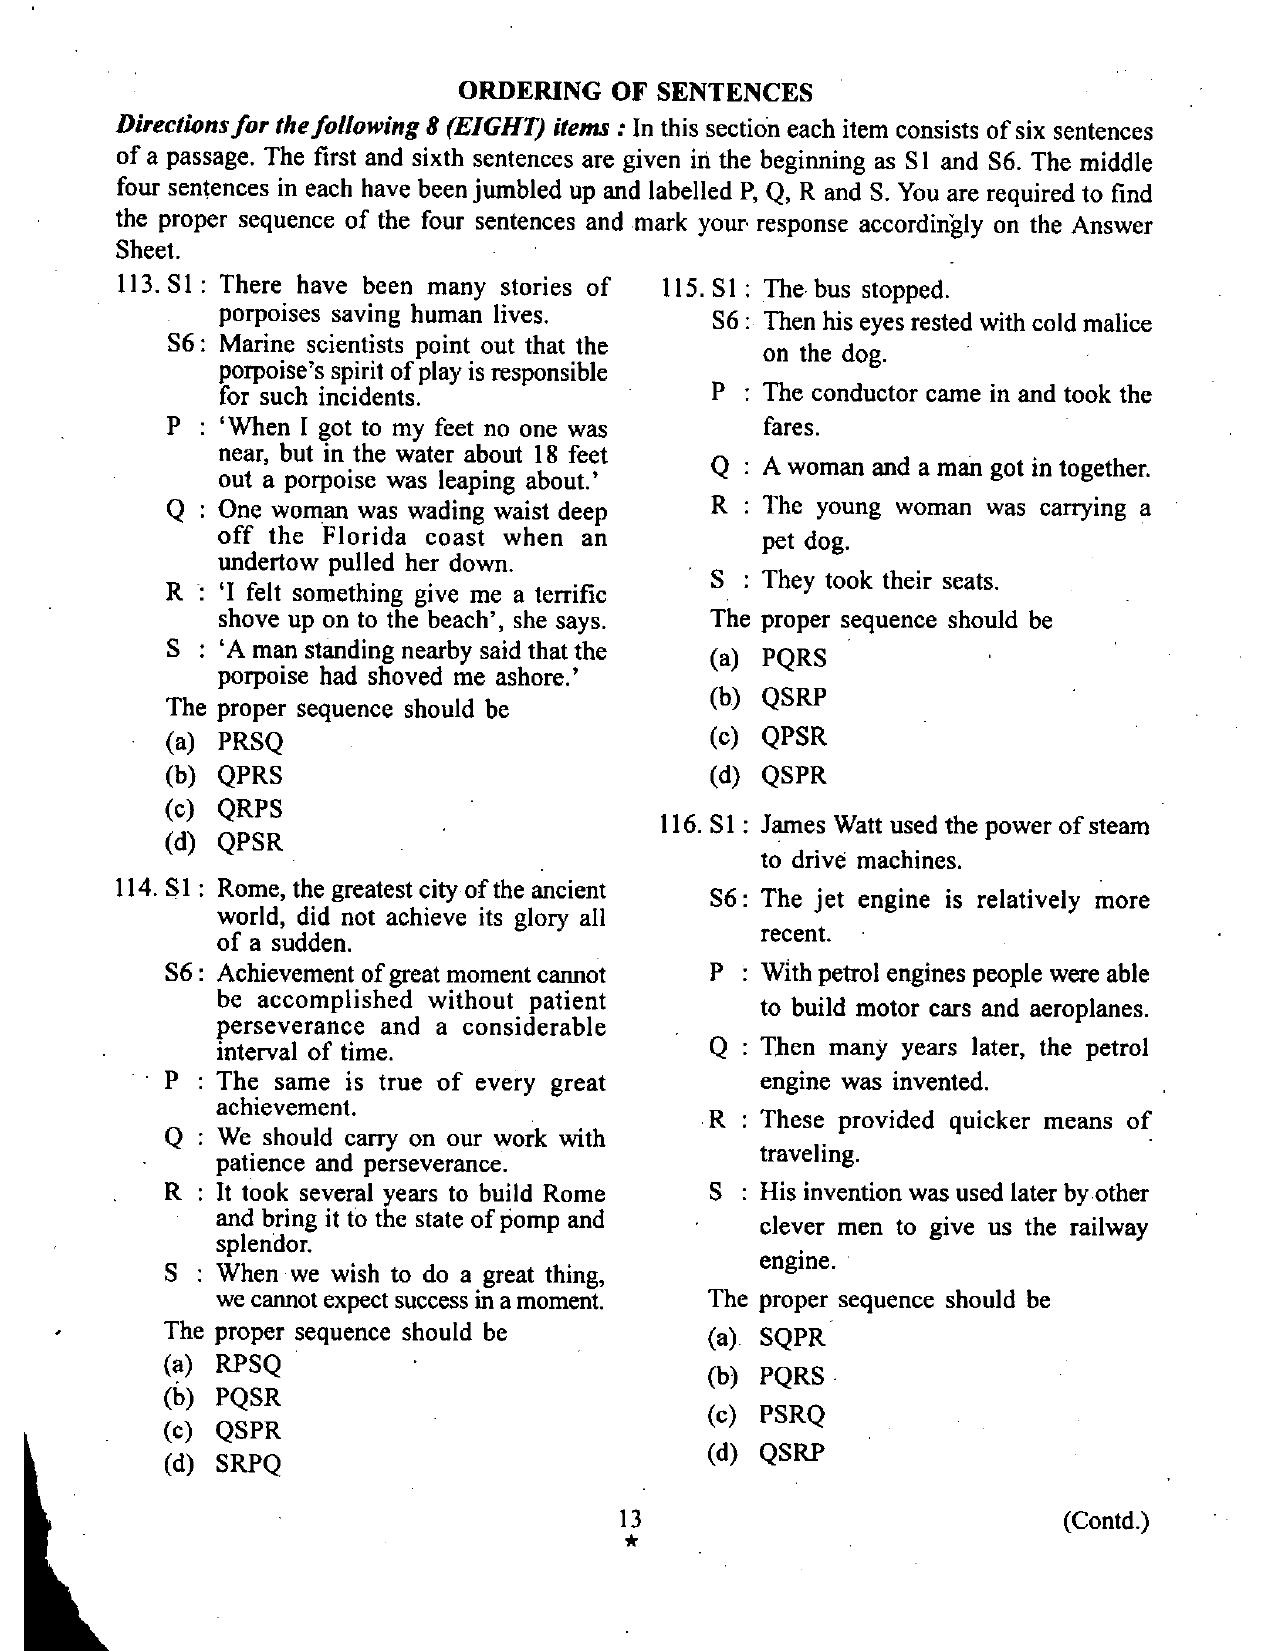 Jharkhand High Court Assistant Previous Year Question Paper - Page 13